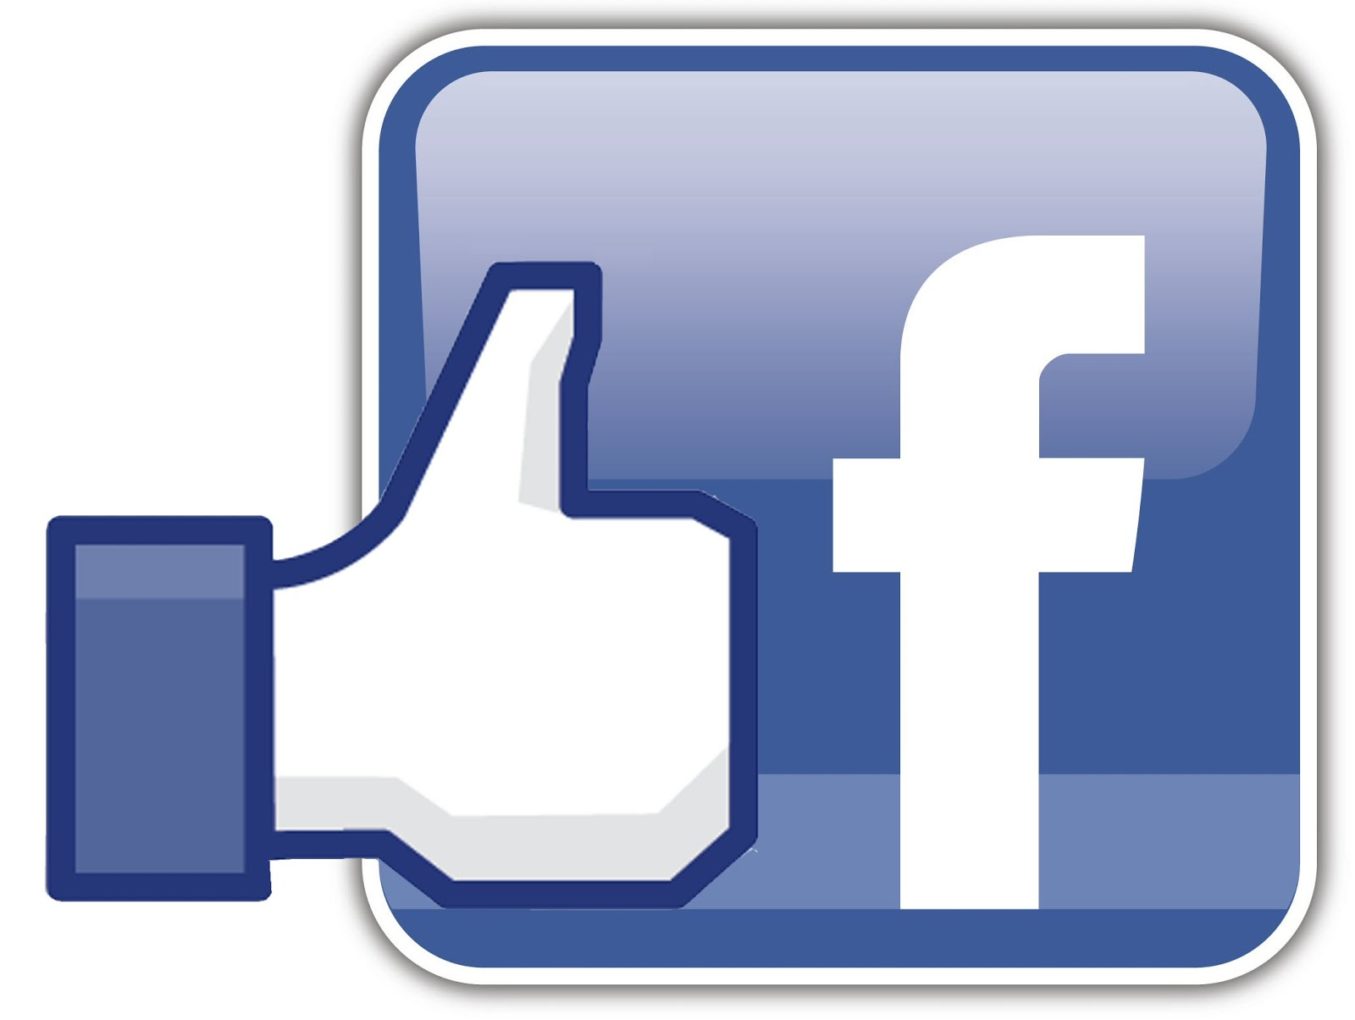 You can find me on Facebook - Swing on by and Like my page